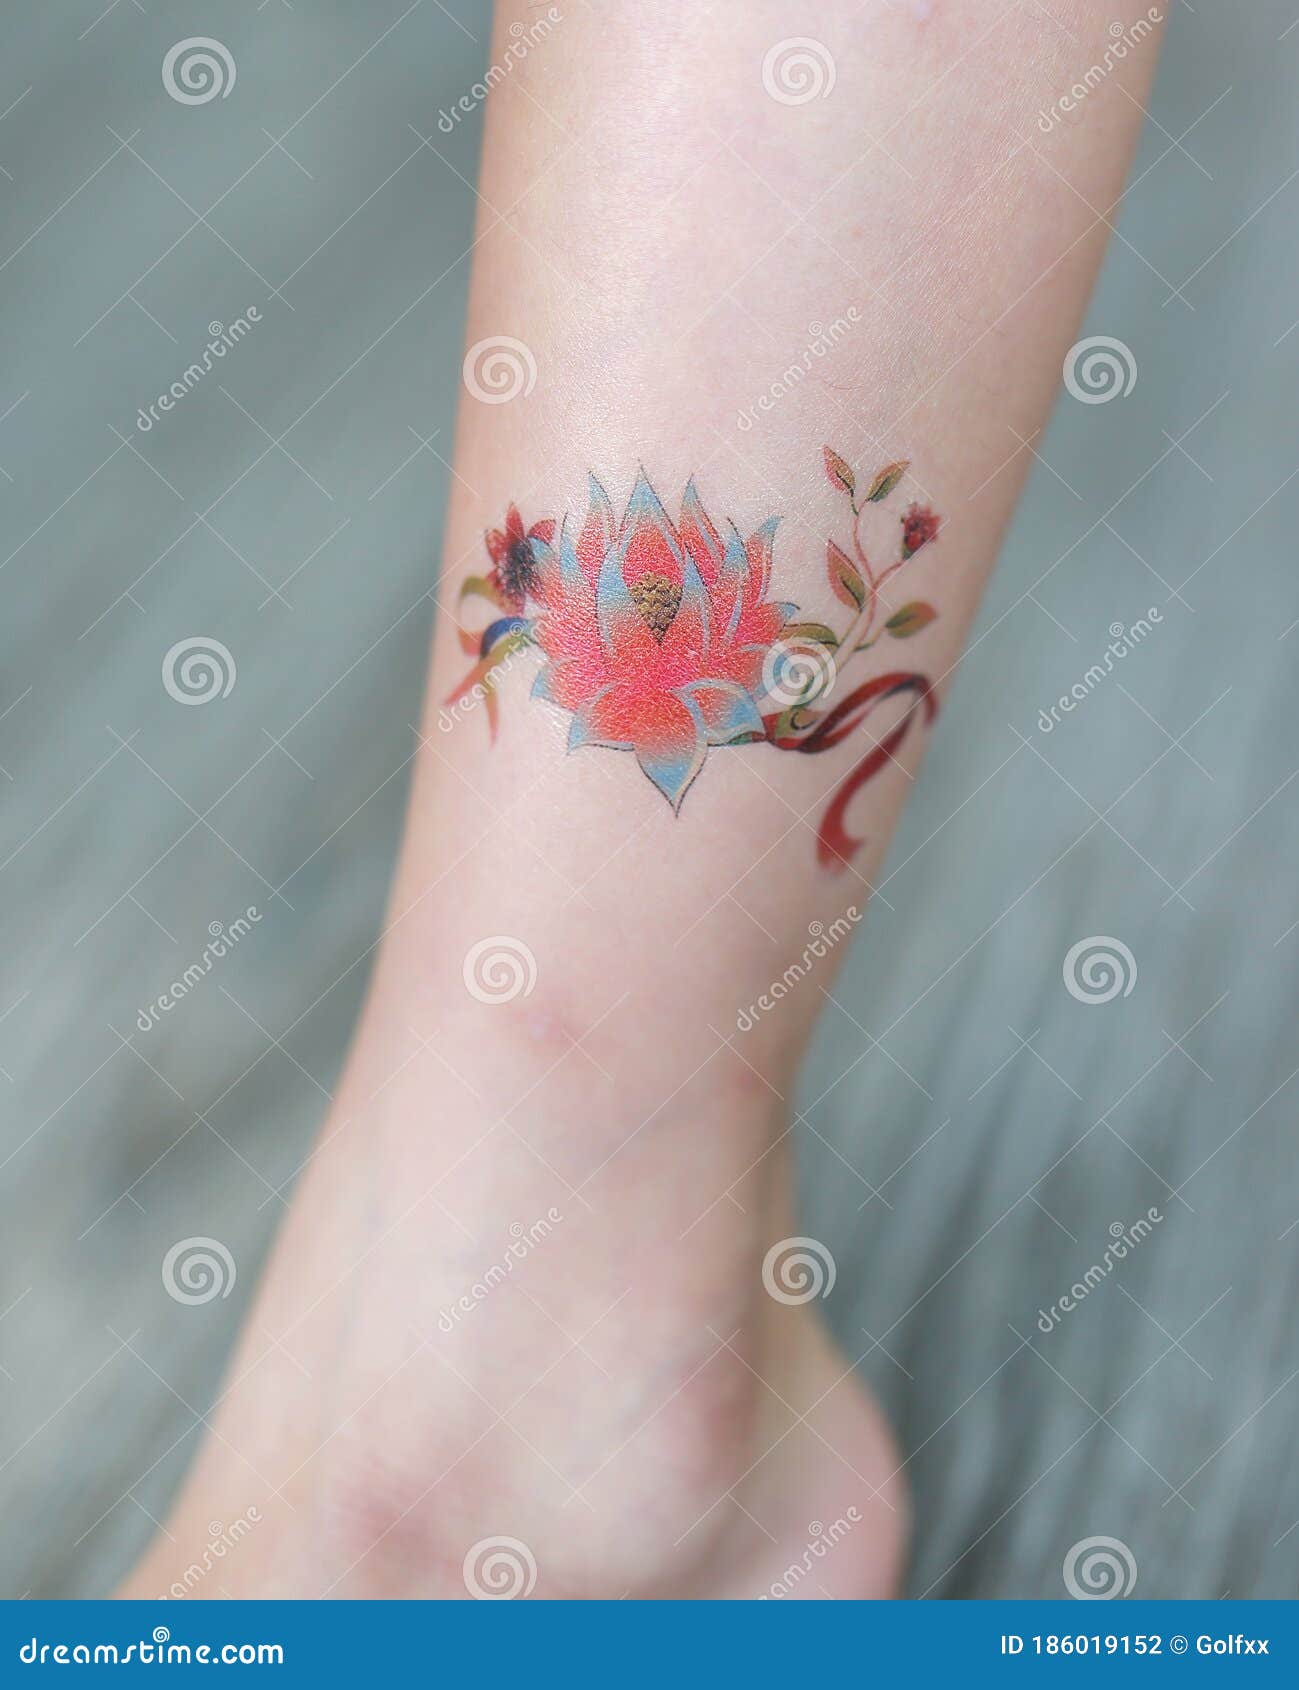 10 Subtle Ankle Tattoo Designs If You Want Something Lowkey